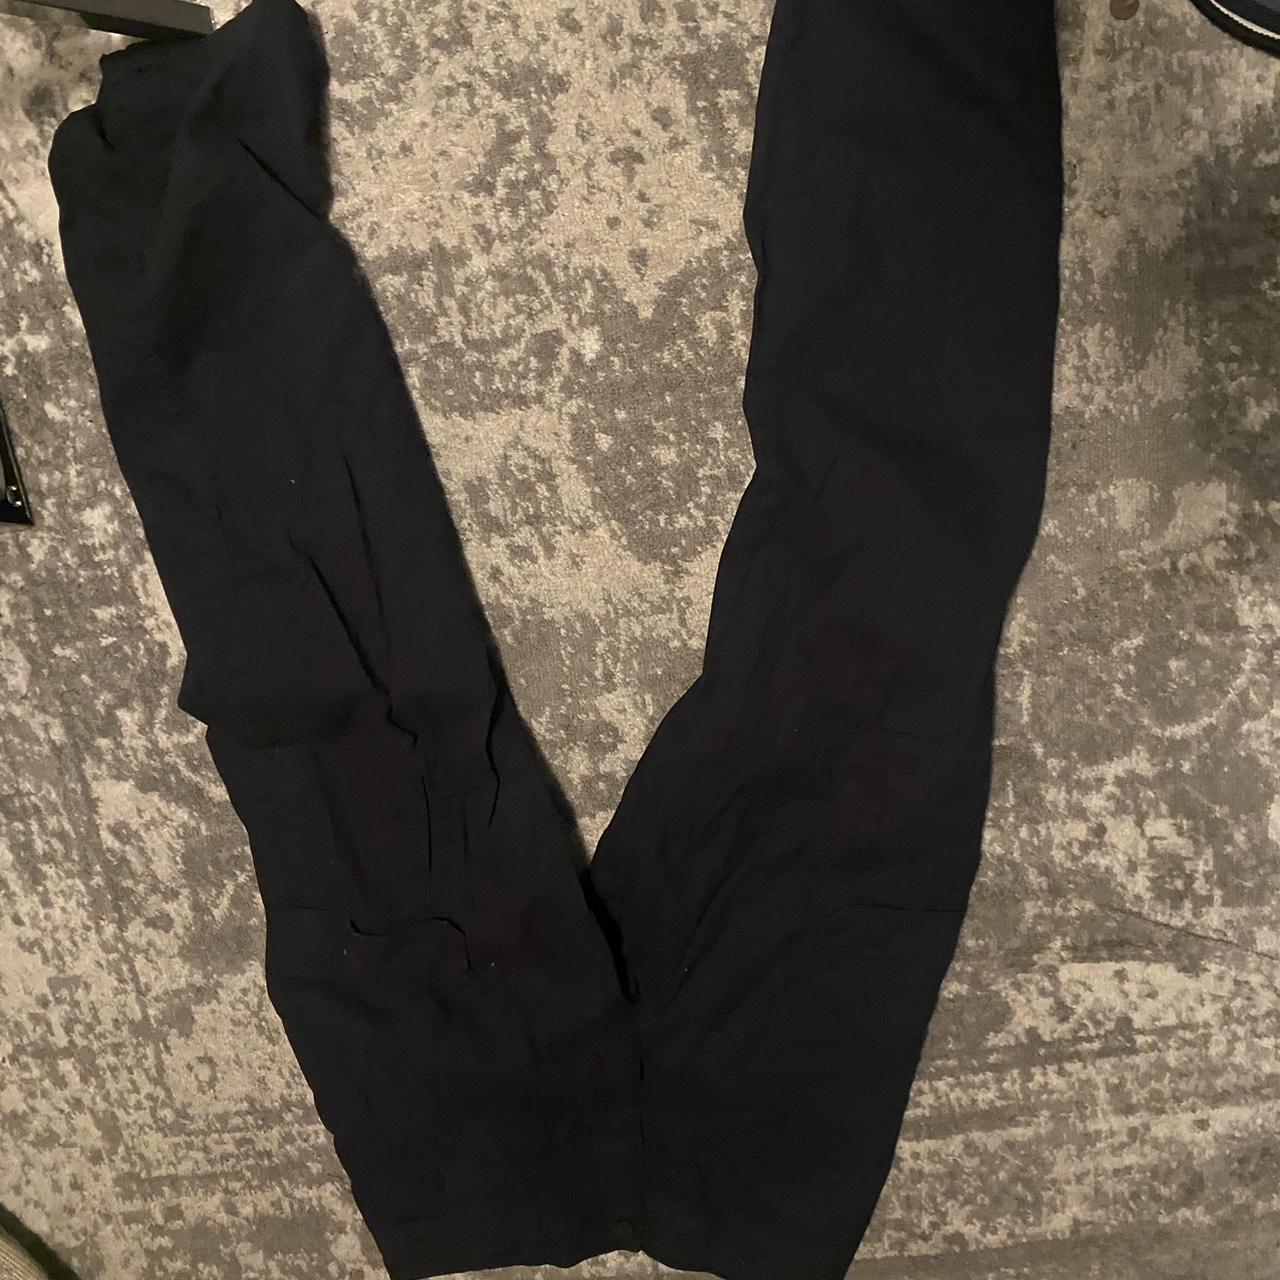 Wrangler Cargos 34x34 Idk why the picture is upside... - Depop